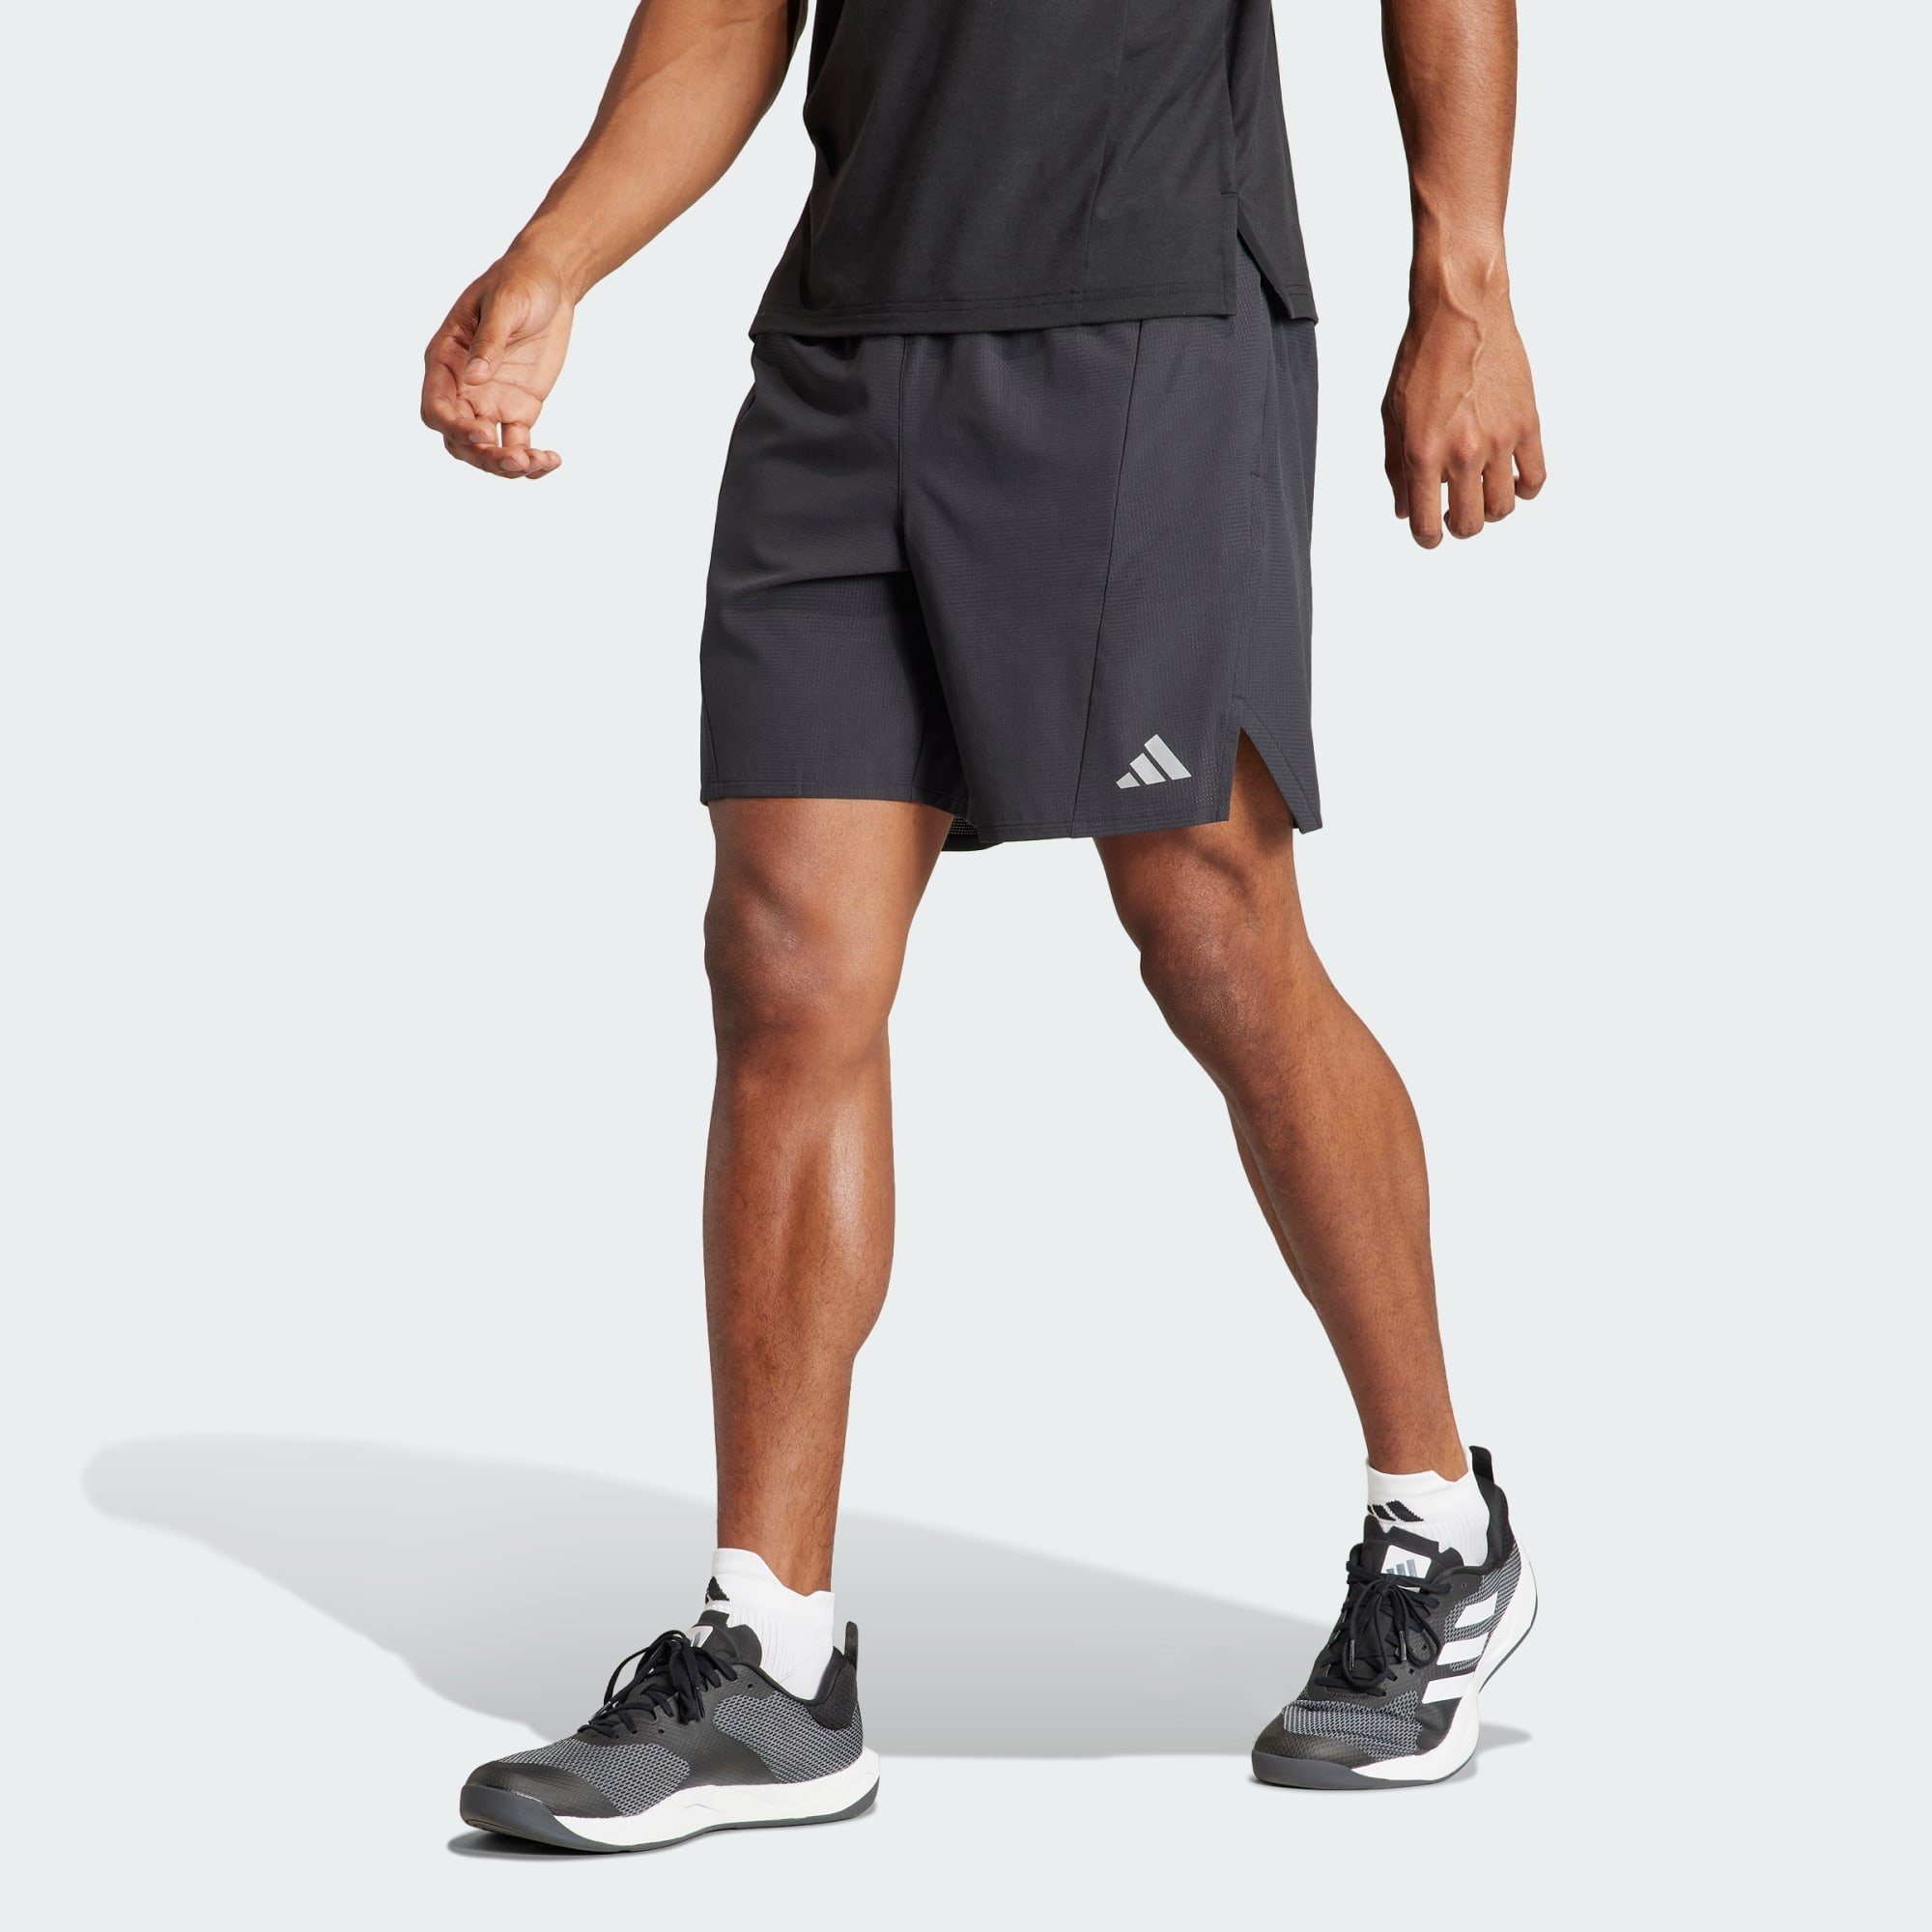 adidas Performance Funktionsshorts DESIGNED FOR TRAINING HIIT WORKOUT HEAT.RDY SHORTS